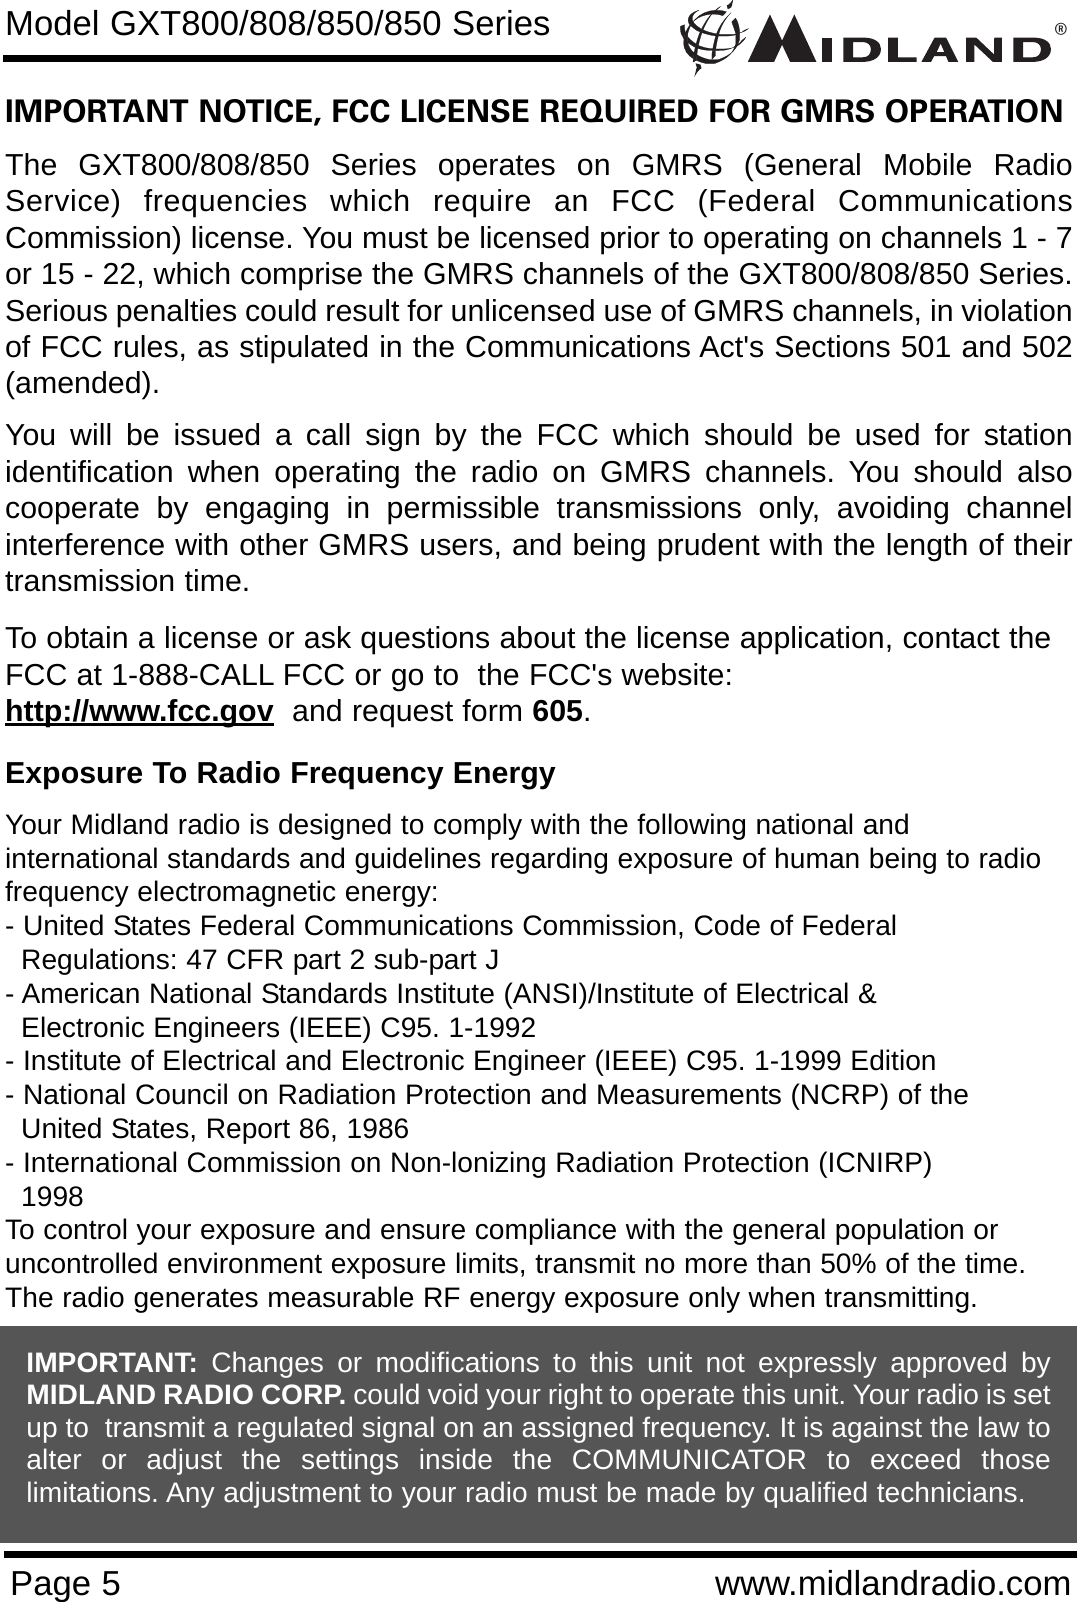 ®Page 5 www.midlandradio.comIMPORTANT NOTICE, FCC LICENSE REQUIRED FOR GMRS OPERATIONThe GXT800/808/850 Series operates on GMRS (General Mobile RadioService) frequencies which require an FCC (Federal CommunicationsCommission) license. You must be licensed prior to operating on channels 1 - 7or 15 - 22, which comprise the GMRS channels of the GXT800/808/850 Series.Serious penalties could result for unlicensed use of GMRS channels, in violationof FCC rules, as stipulated in the Communications Act&apos;s Sections 501 and 502(amended).You will be issued a call sign by the FCC which should be used for stationidentification when operating the radio on GMRS channels. You should alsocooperate by engaging in permissible transmissions only, avoiding channelinterference with other GMRS users, and being prudent with the length of theirtransmission time.To obtain a license or ask questions about the license application, contact theFCC at 1-888-CALL FCC or go to  the FCC&apos;s website:  http://www.fcc.gov and request form 605.Exposure To Radio Frequency EnergyYour Midland radio is designed to comply with the following national and international standards and guidelines regarding exposure of human being to radiofrequency electromagnetic energy:- United States Federal Communications Commission, Code of Federal Regulations: 47 CFR part 2 sub-part J- American National Standards Institute (ANSI)/Institute of Electrical &amp; Electronic Engineers (IEEE) C95. 1-1992- Institute of Electrical and Electronic Engineer (IEEE) C95. 1-1999 Edition- National Council on Radiation Protection and Measurements (NCRP) of the United States, Report 86, 1986- International Commission on Non-lonizing Radiation Protection (ICNIRP) 1998To control your exposure and ensure compliance with the general population oruncontrolled environment exposure limits, transmit no more than 50% of the time.The radio generates measurable RF energy exposure only when transmitting.Model GXT800/808/850/850 SeriesIMPORTANT: Changes or modifications to this unit not expressly approved byMIDLAND RADIO CORP. could void your right to operate this unit. Your radio is setup to  transmit a regulated signal on an assigned frequency. It is against the law toalter or adjust the settings inside the COMMUNICATOR to exceed thoselimitations. Any adjustment to your radio must be made by qualified technicians.